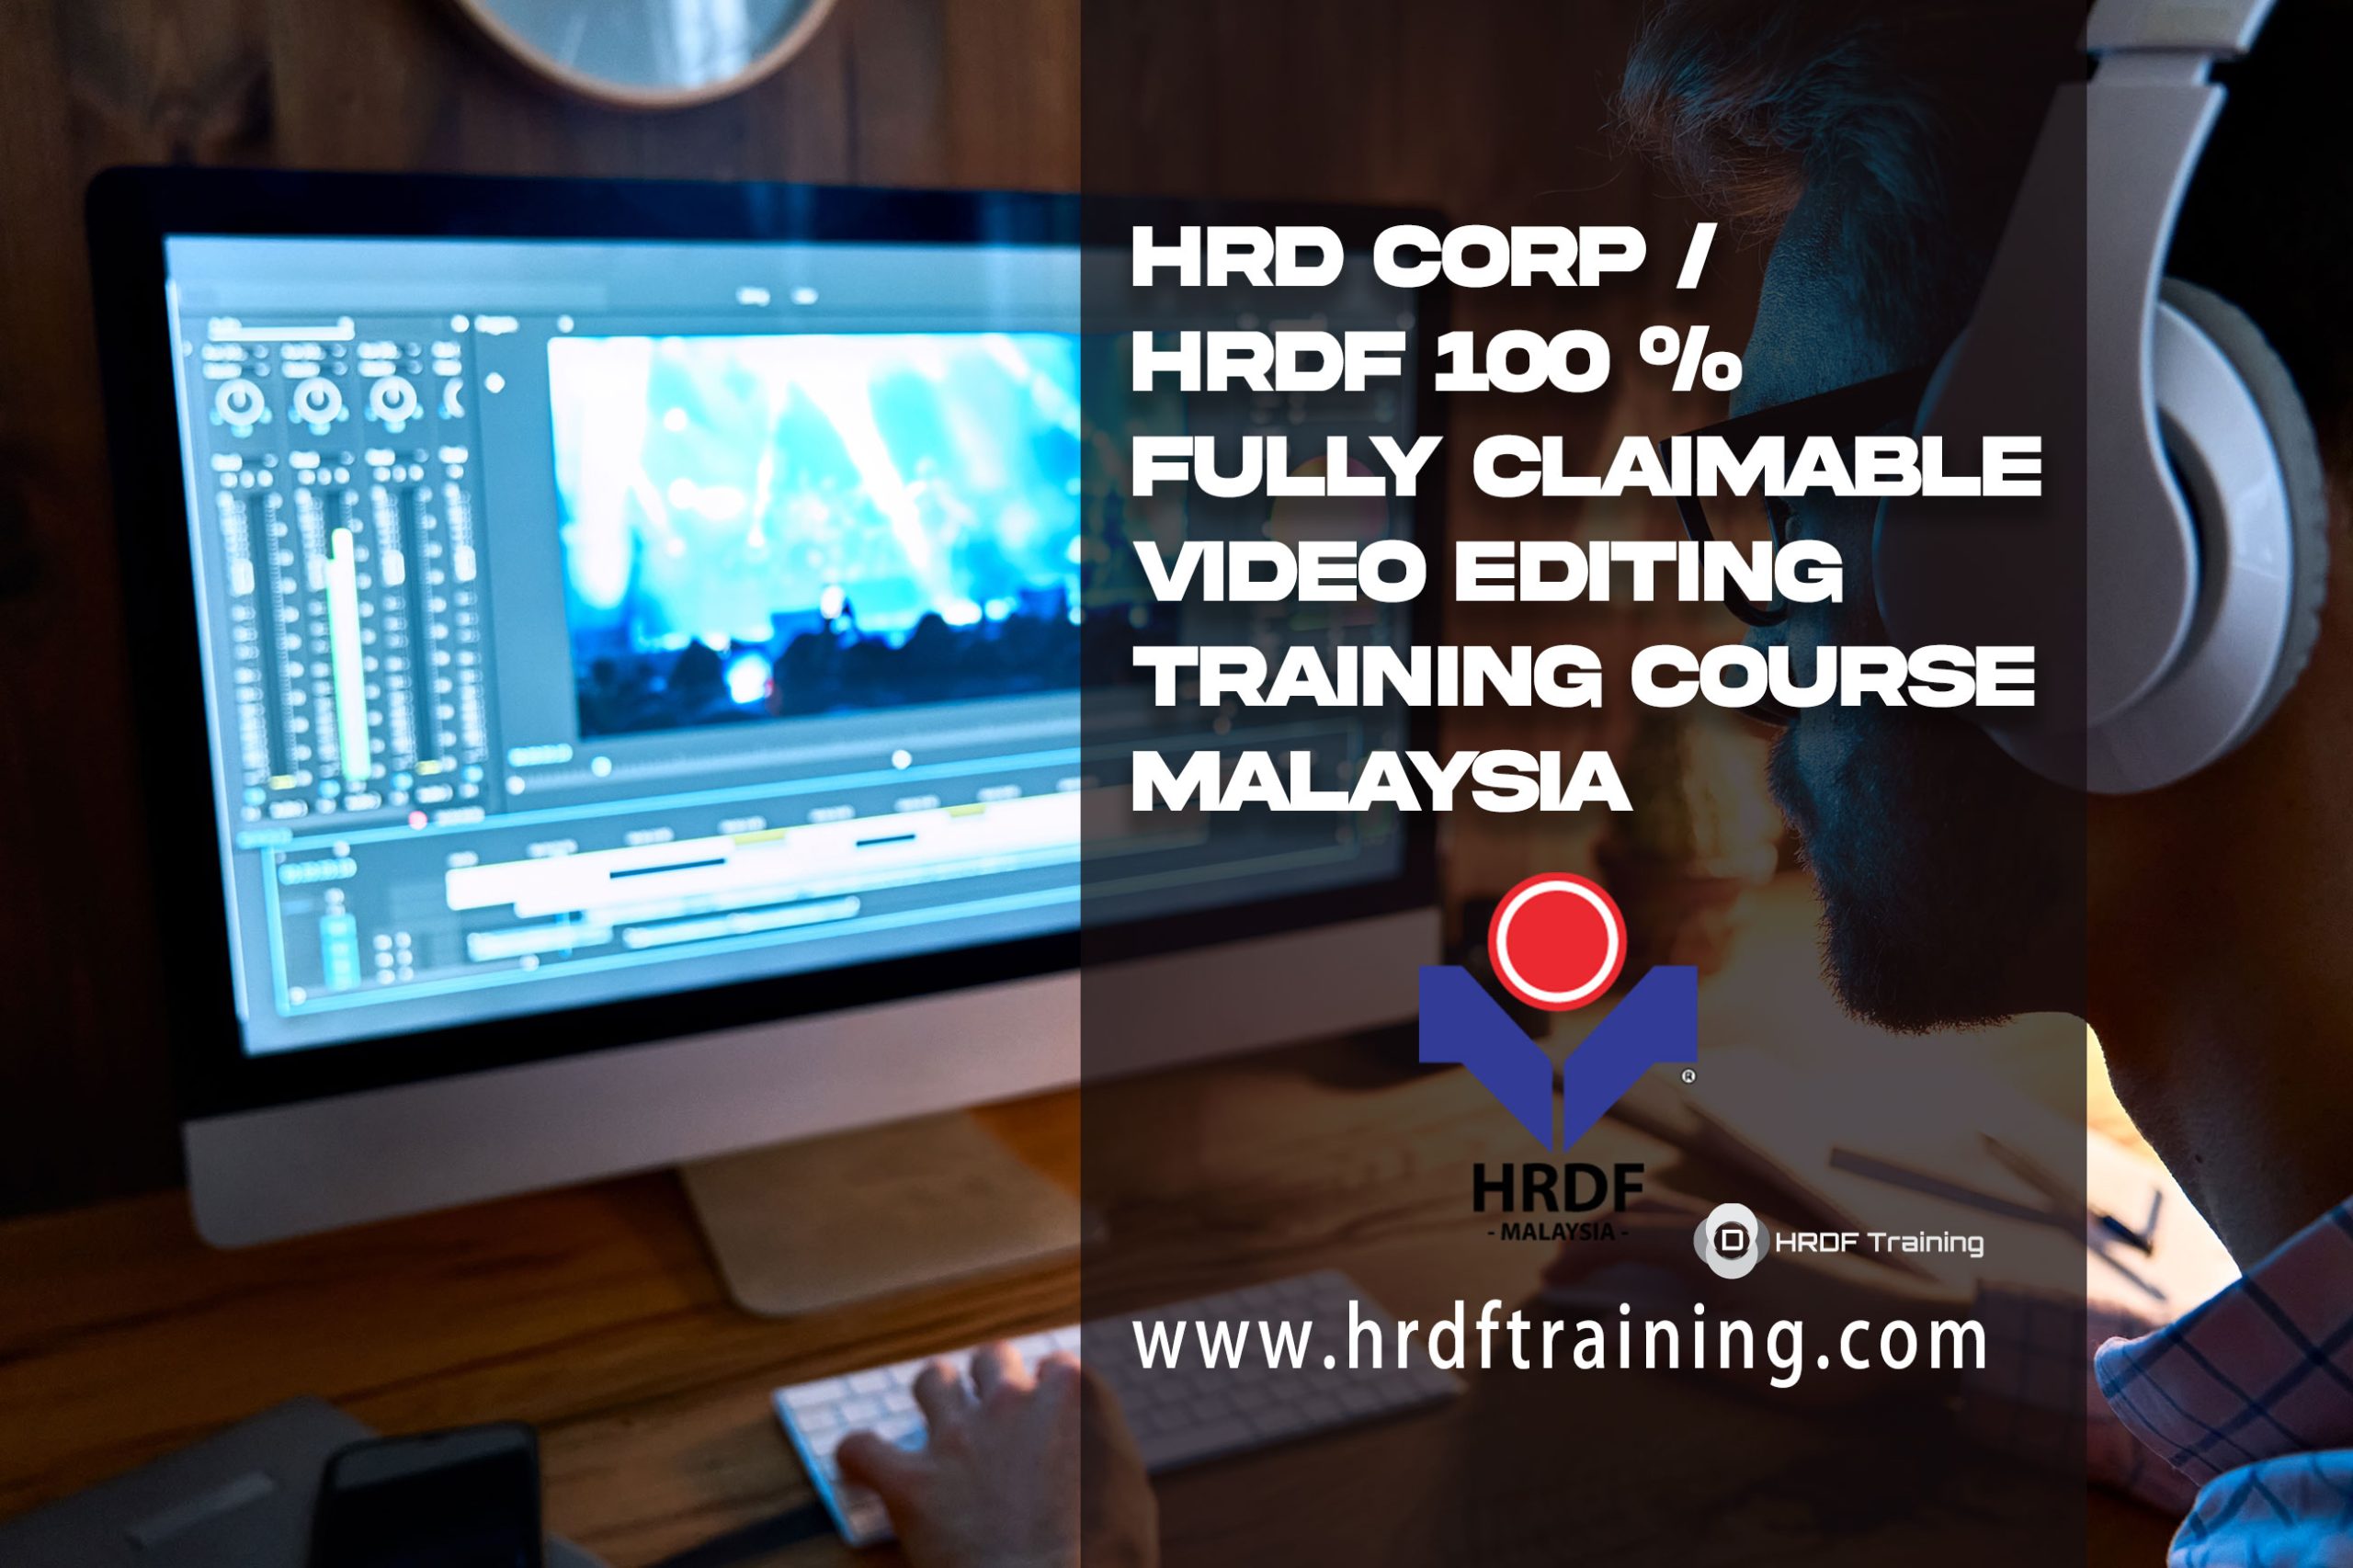 HRDF HRD Corp Claimable Video Editing Training Course Malaysia - June 2022